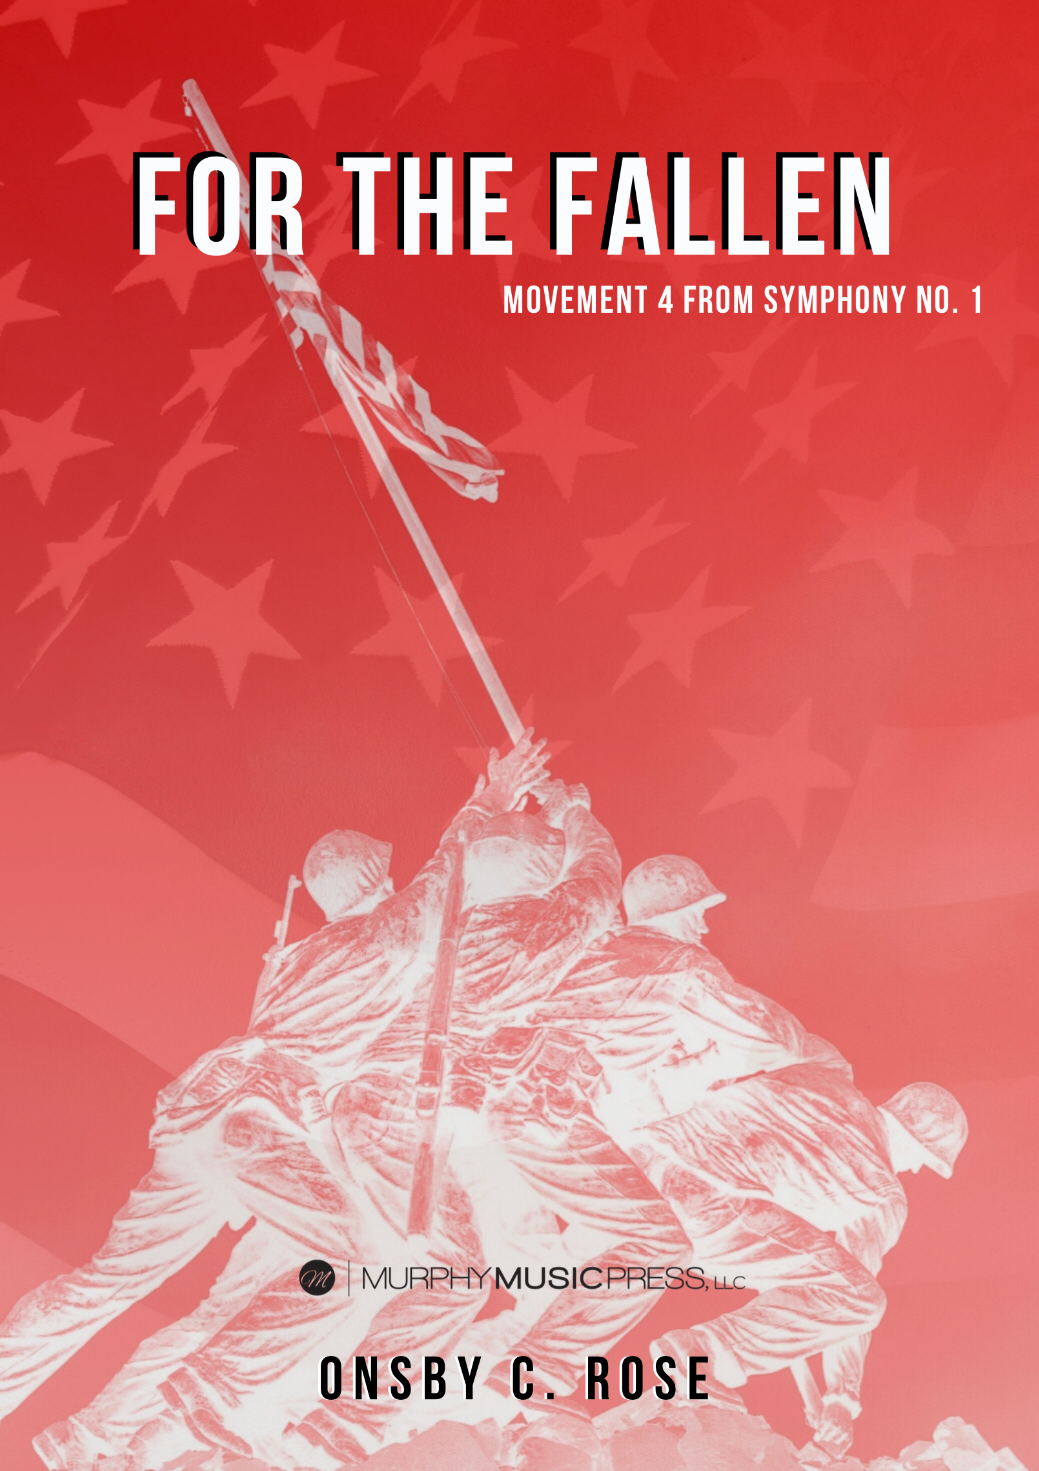 For The Fallen (Score Only) by Onsby C. Rose